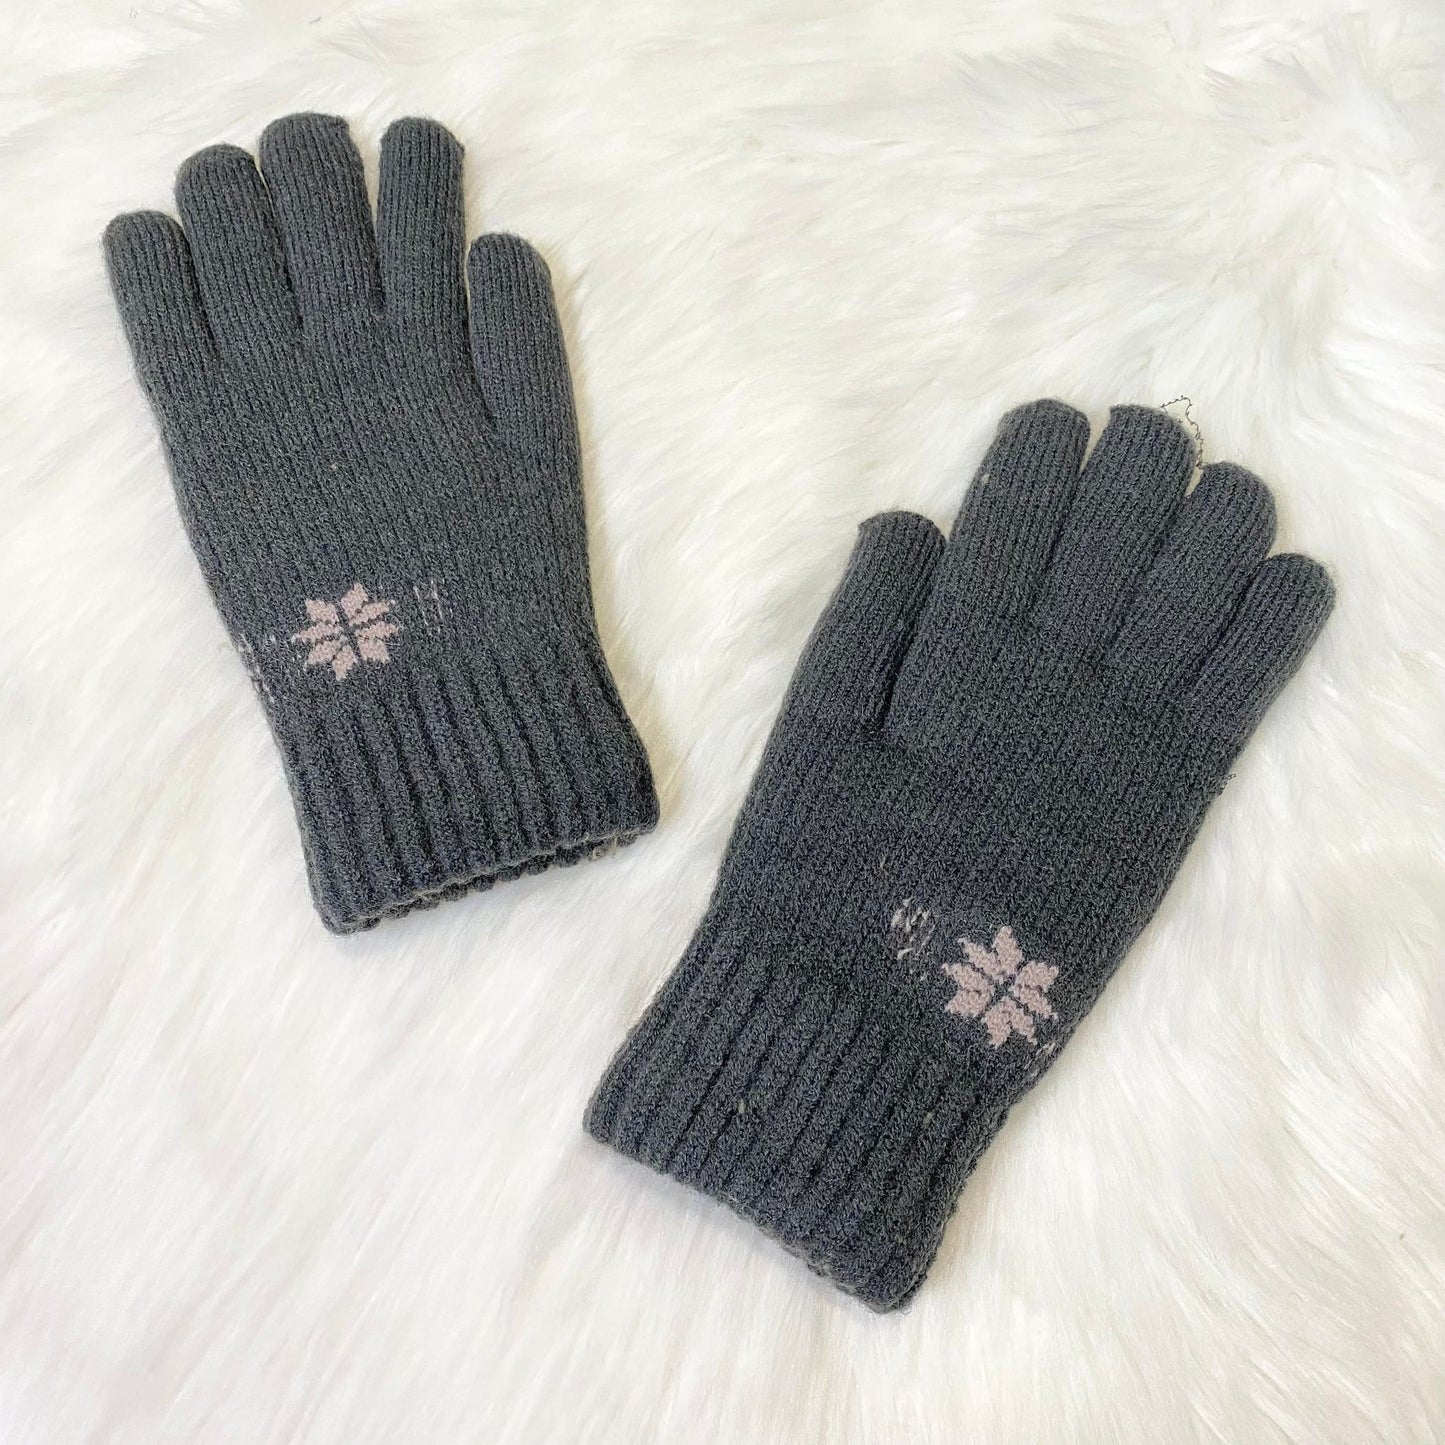 Thick Insulated Hand Knit Winter Unisex Gloves